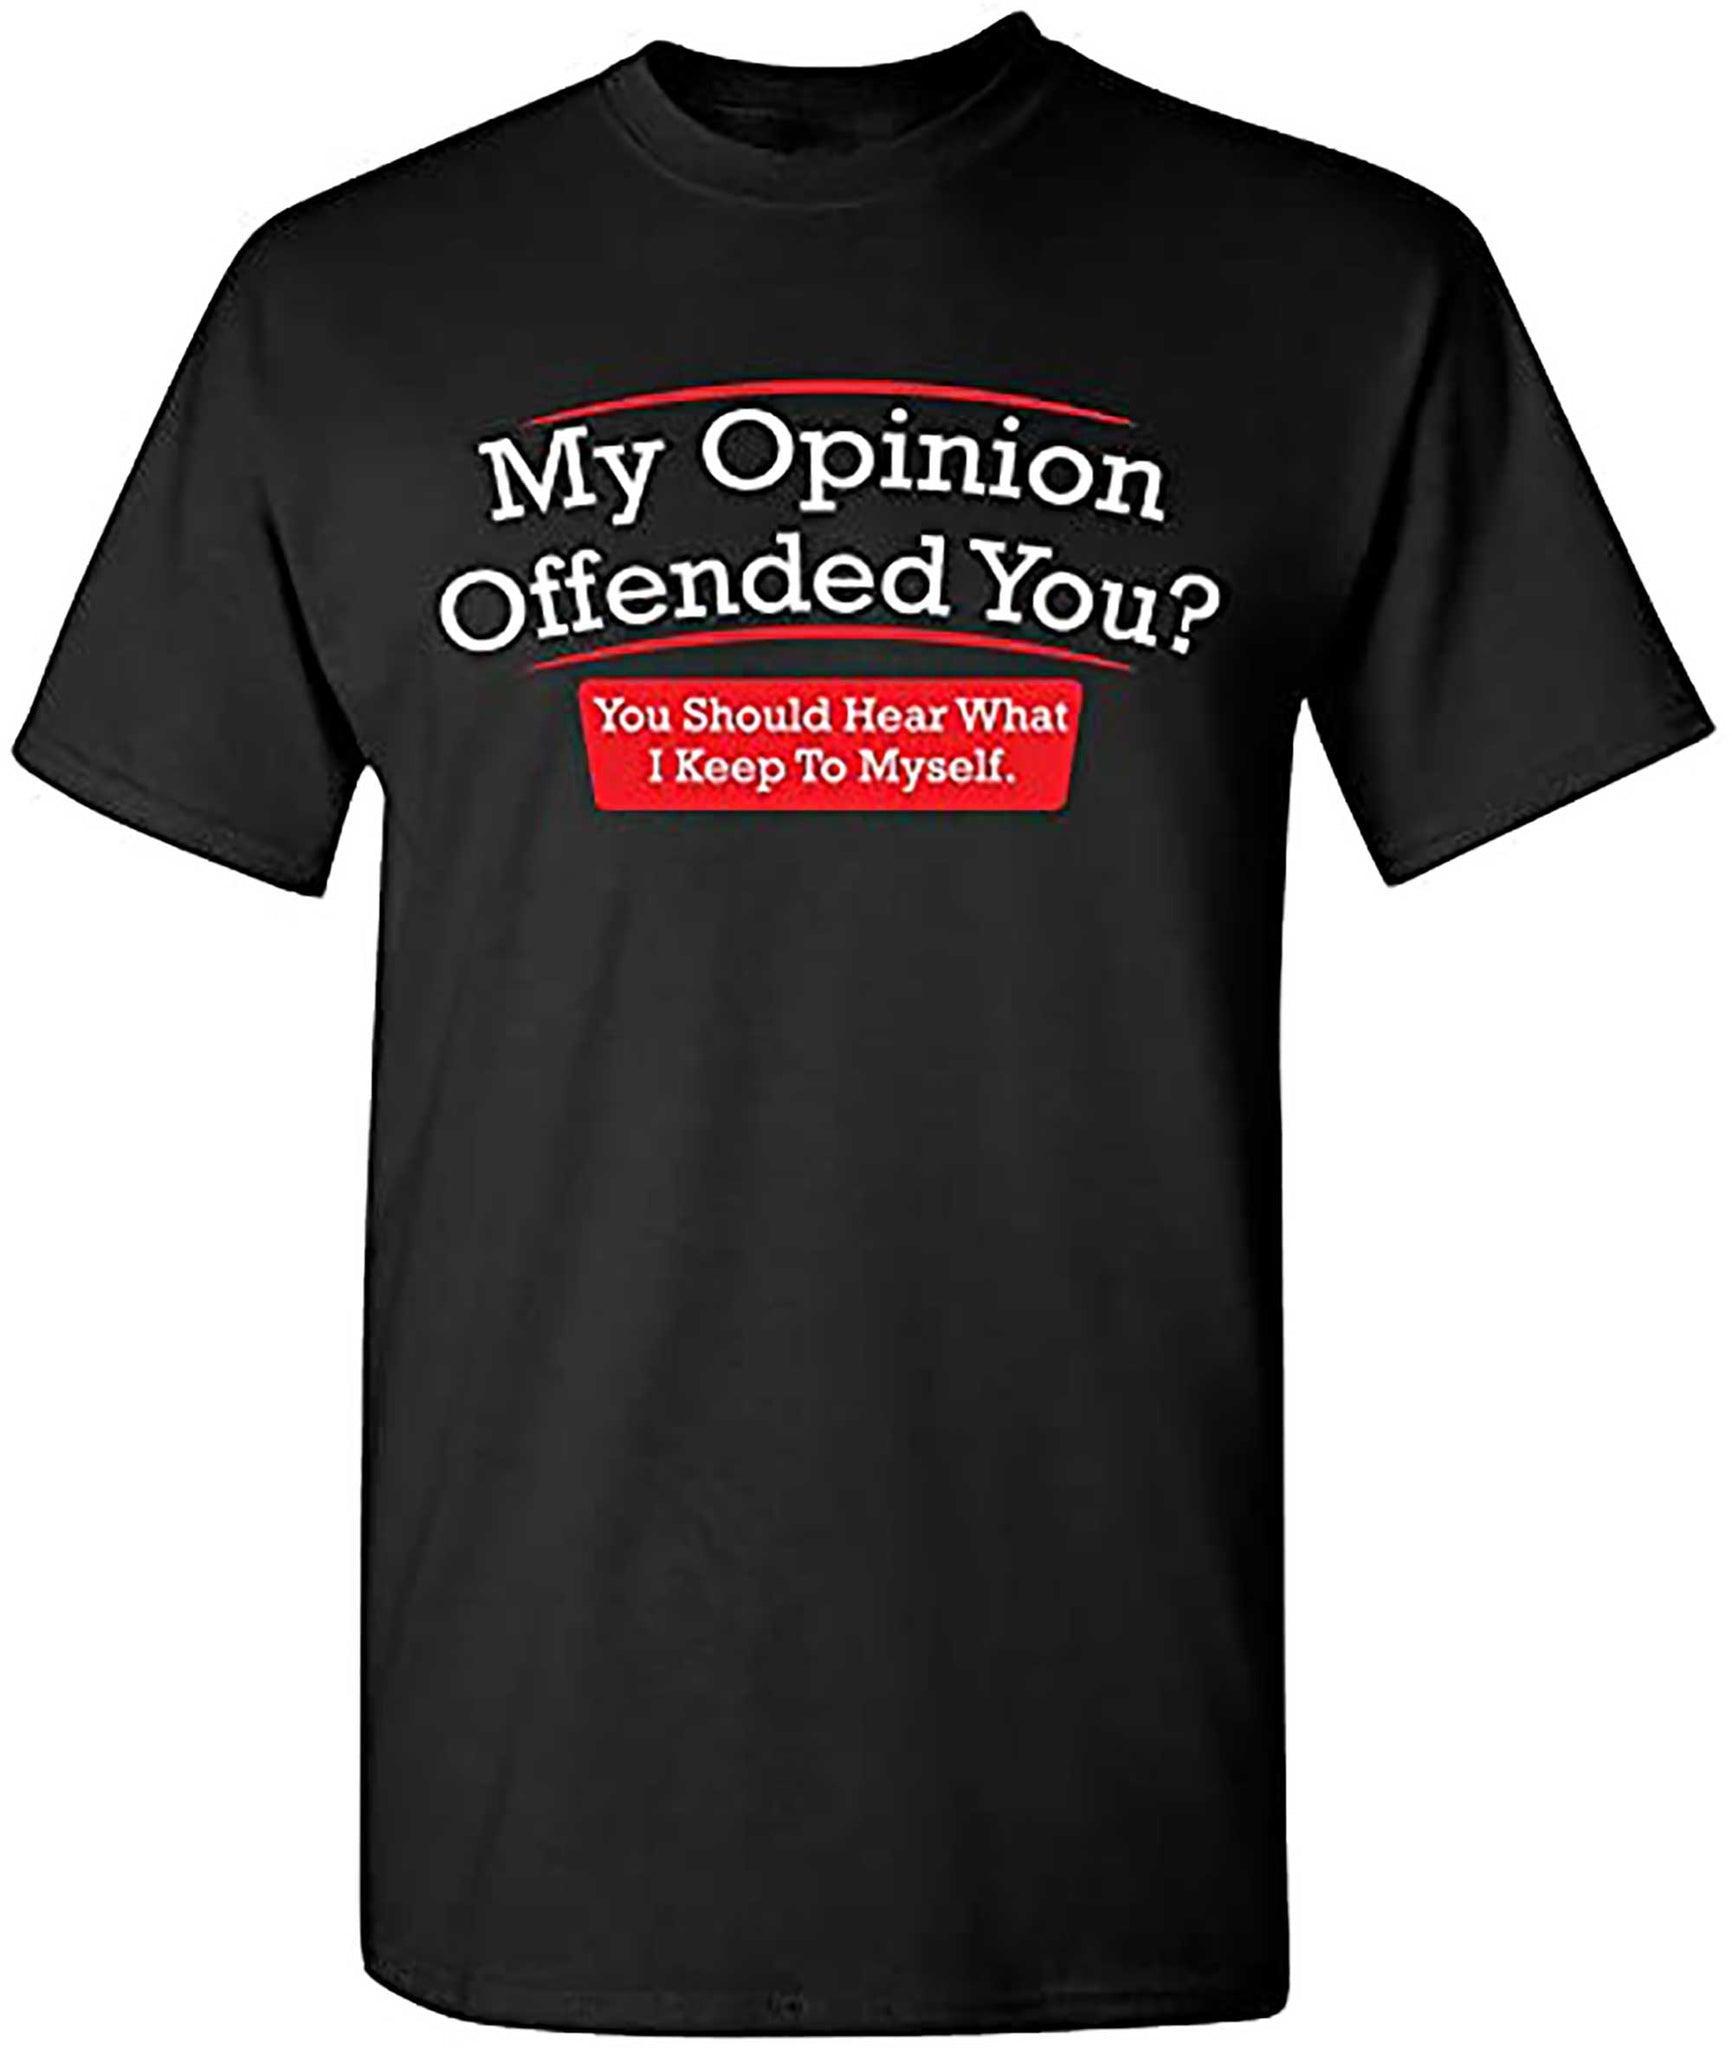 Skitongifts My Opinion Offended You Adult Humor Novelty Sarcasm Witty Mens Funny T Shirt